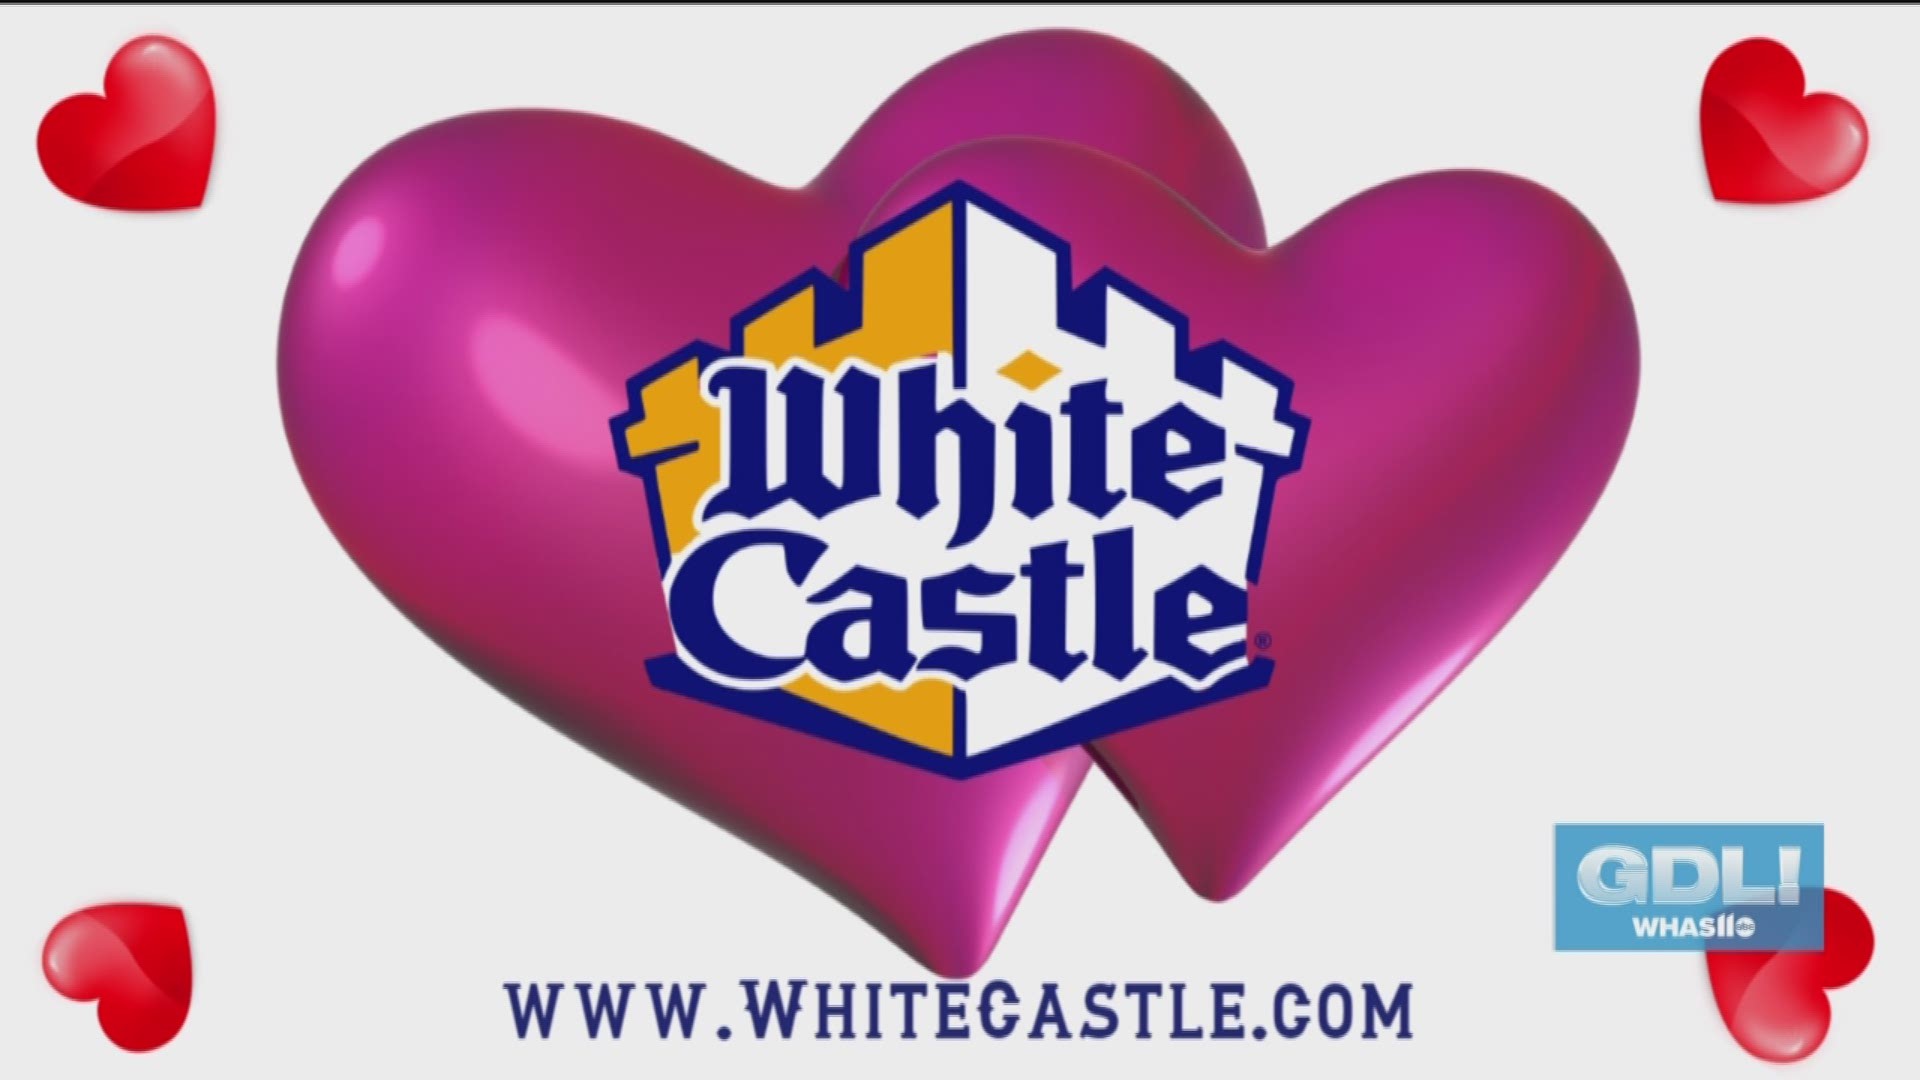 Great Day Live's Holly Rudolph decided to take her Prince Charming (Jim Ghrist) for Valentine's Day dinner in a castle...White Castle, that is!